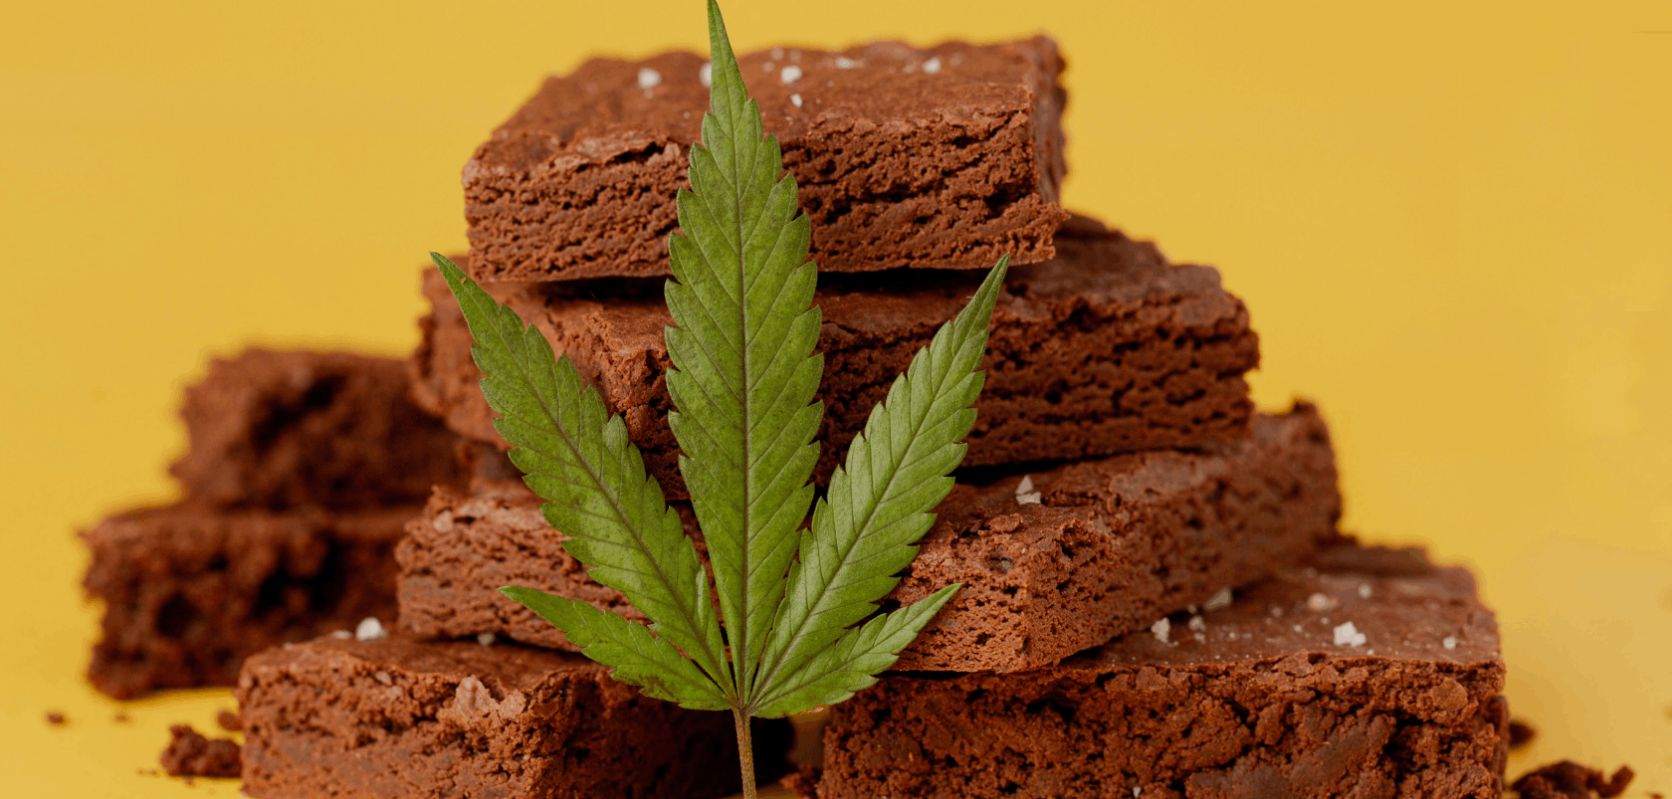 Personal preference is the key factor when choosing the best cannabis strain for your brownies with weed.